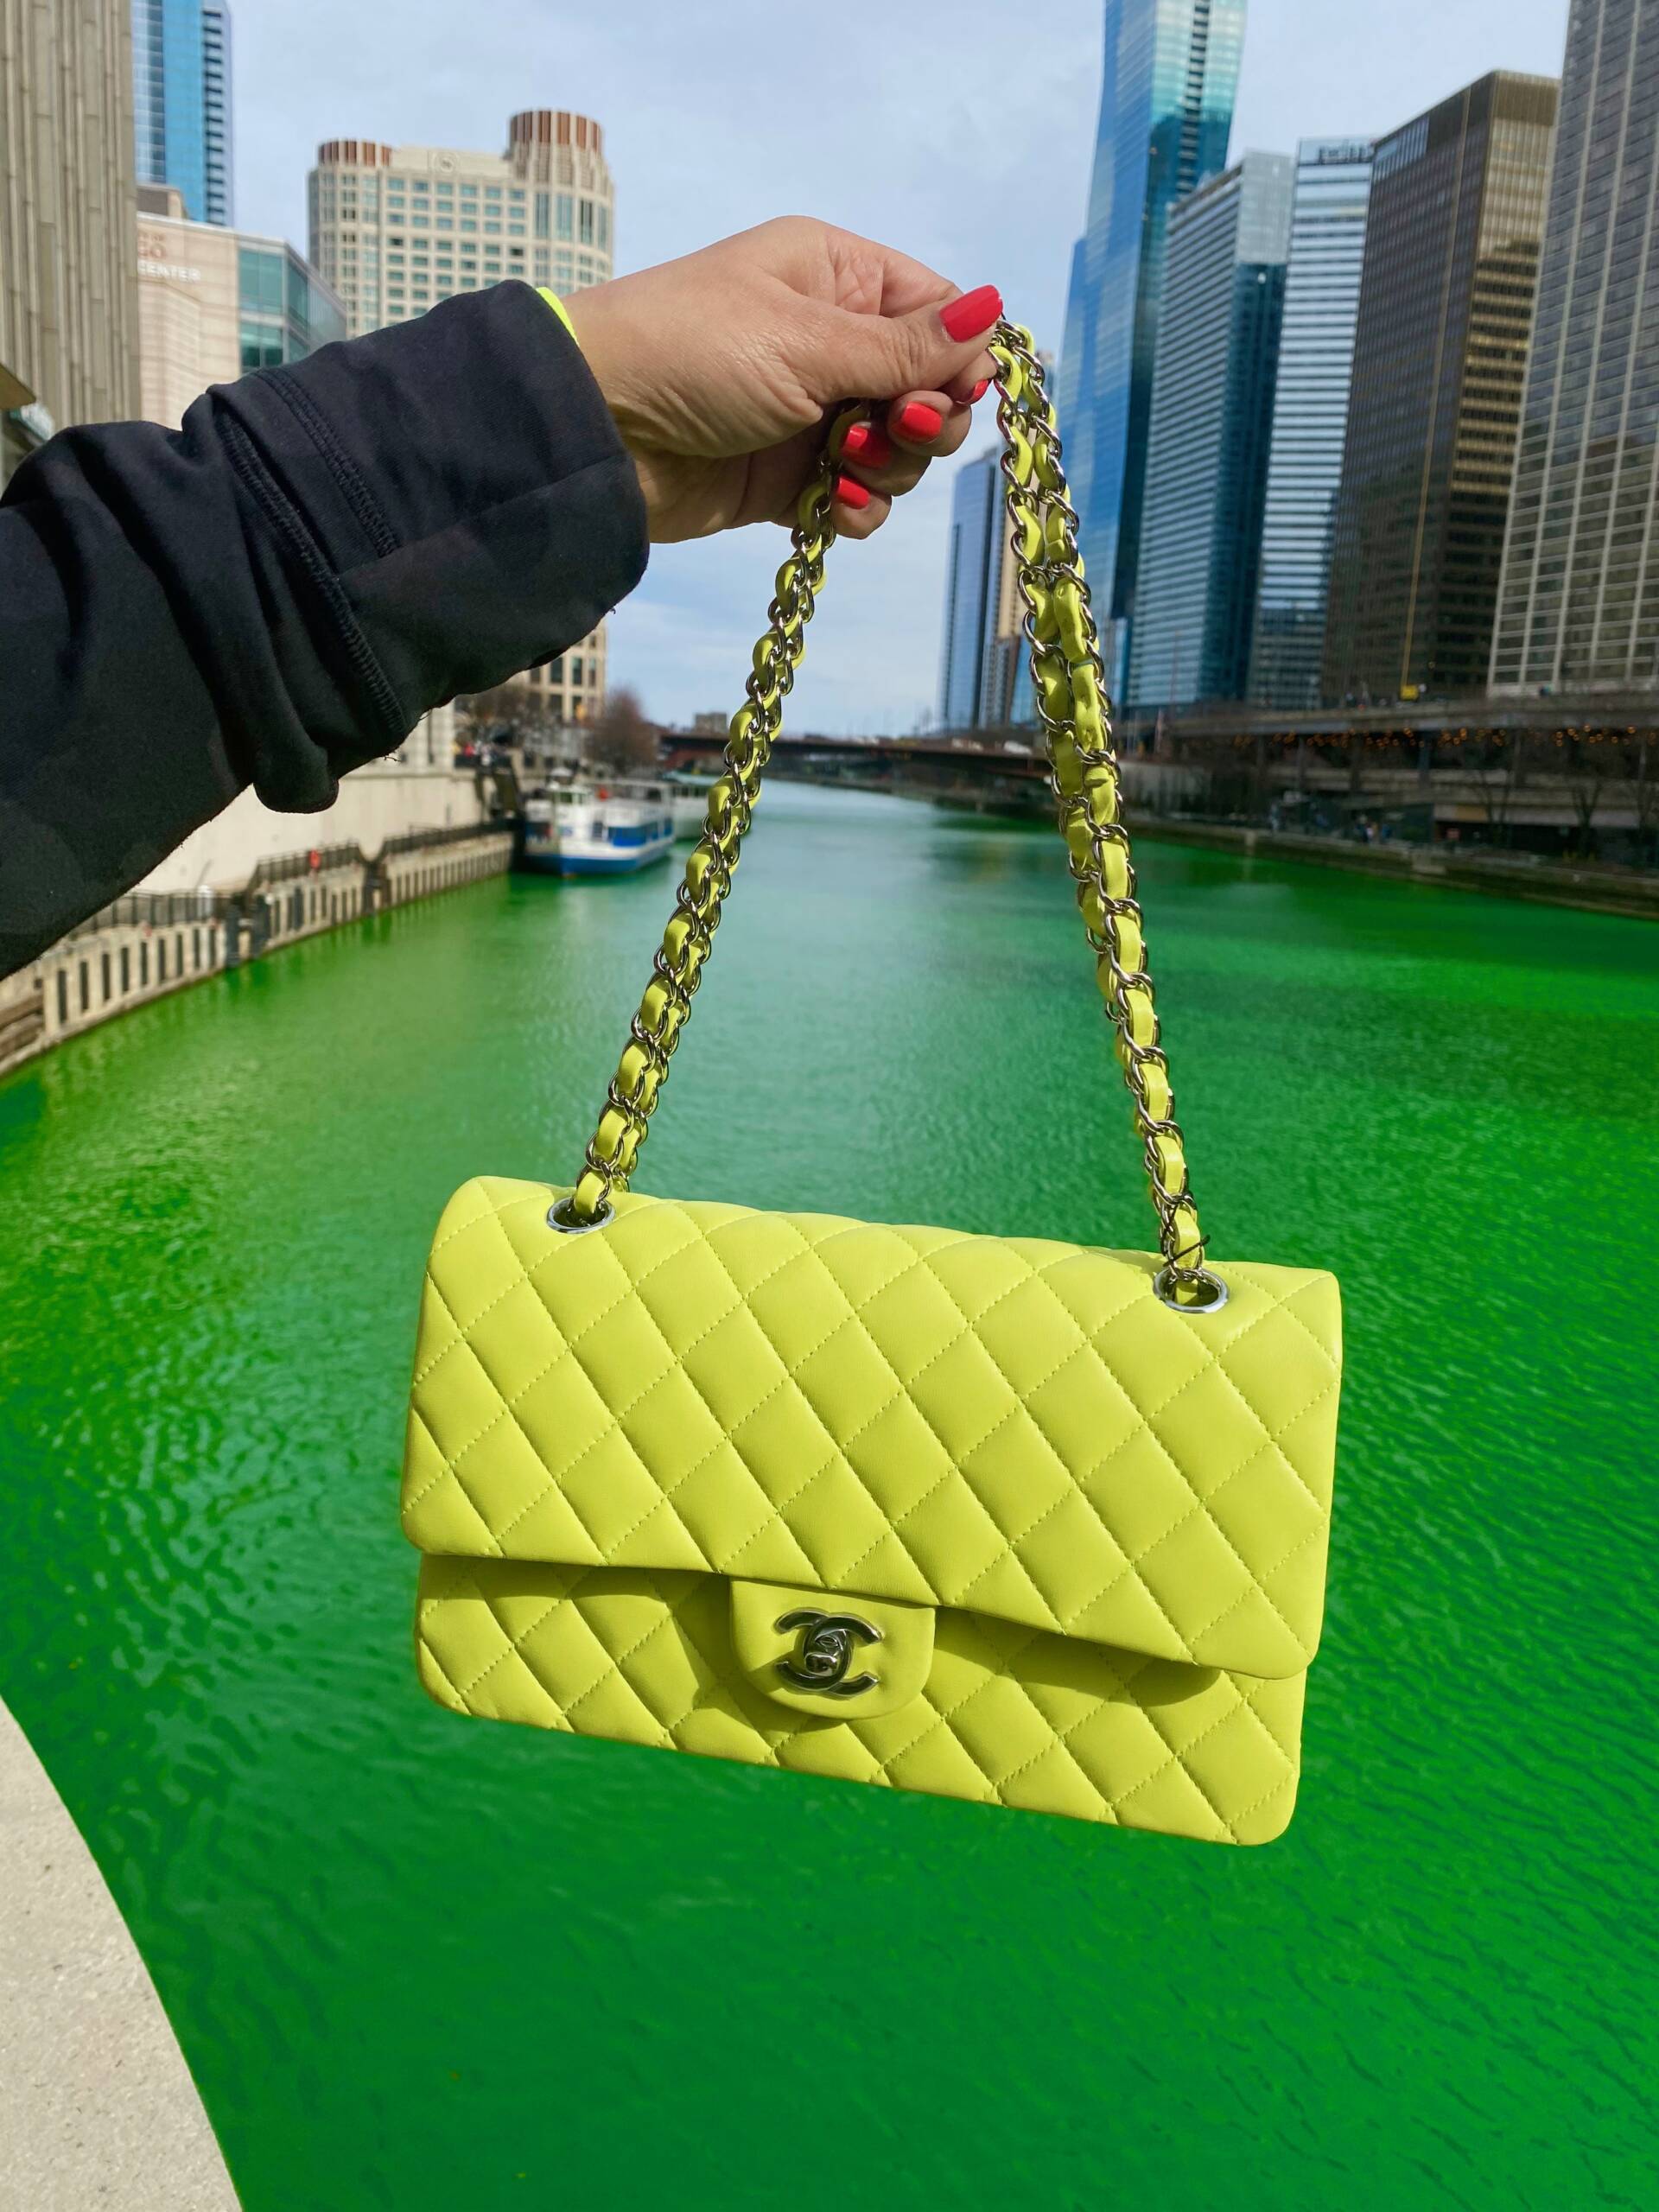 Chanel Just Gave Us the Walkable Flats of Our Dreams (and a Neon Green Bag  We Never Knew We Needed)